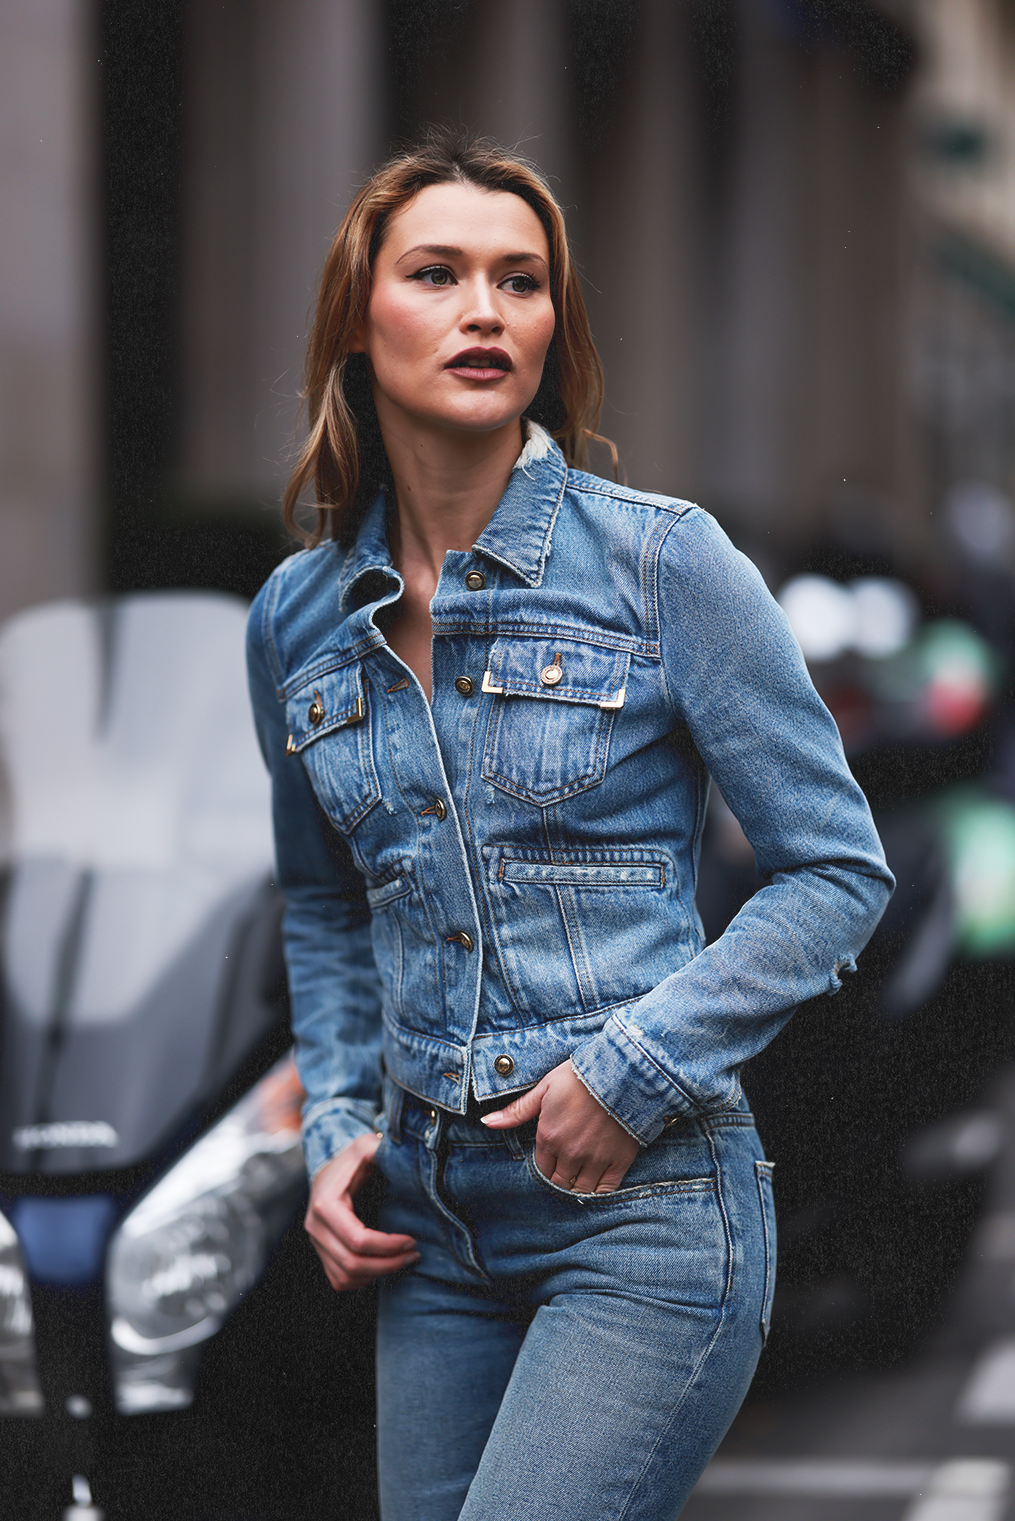 Outerwear & Cropped Denim Jacket for Women | Levi's® PH-cacanhphuclong.com.vn